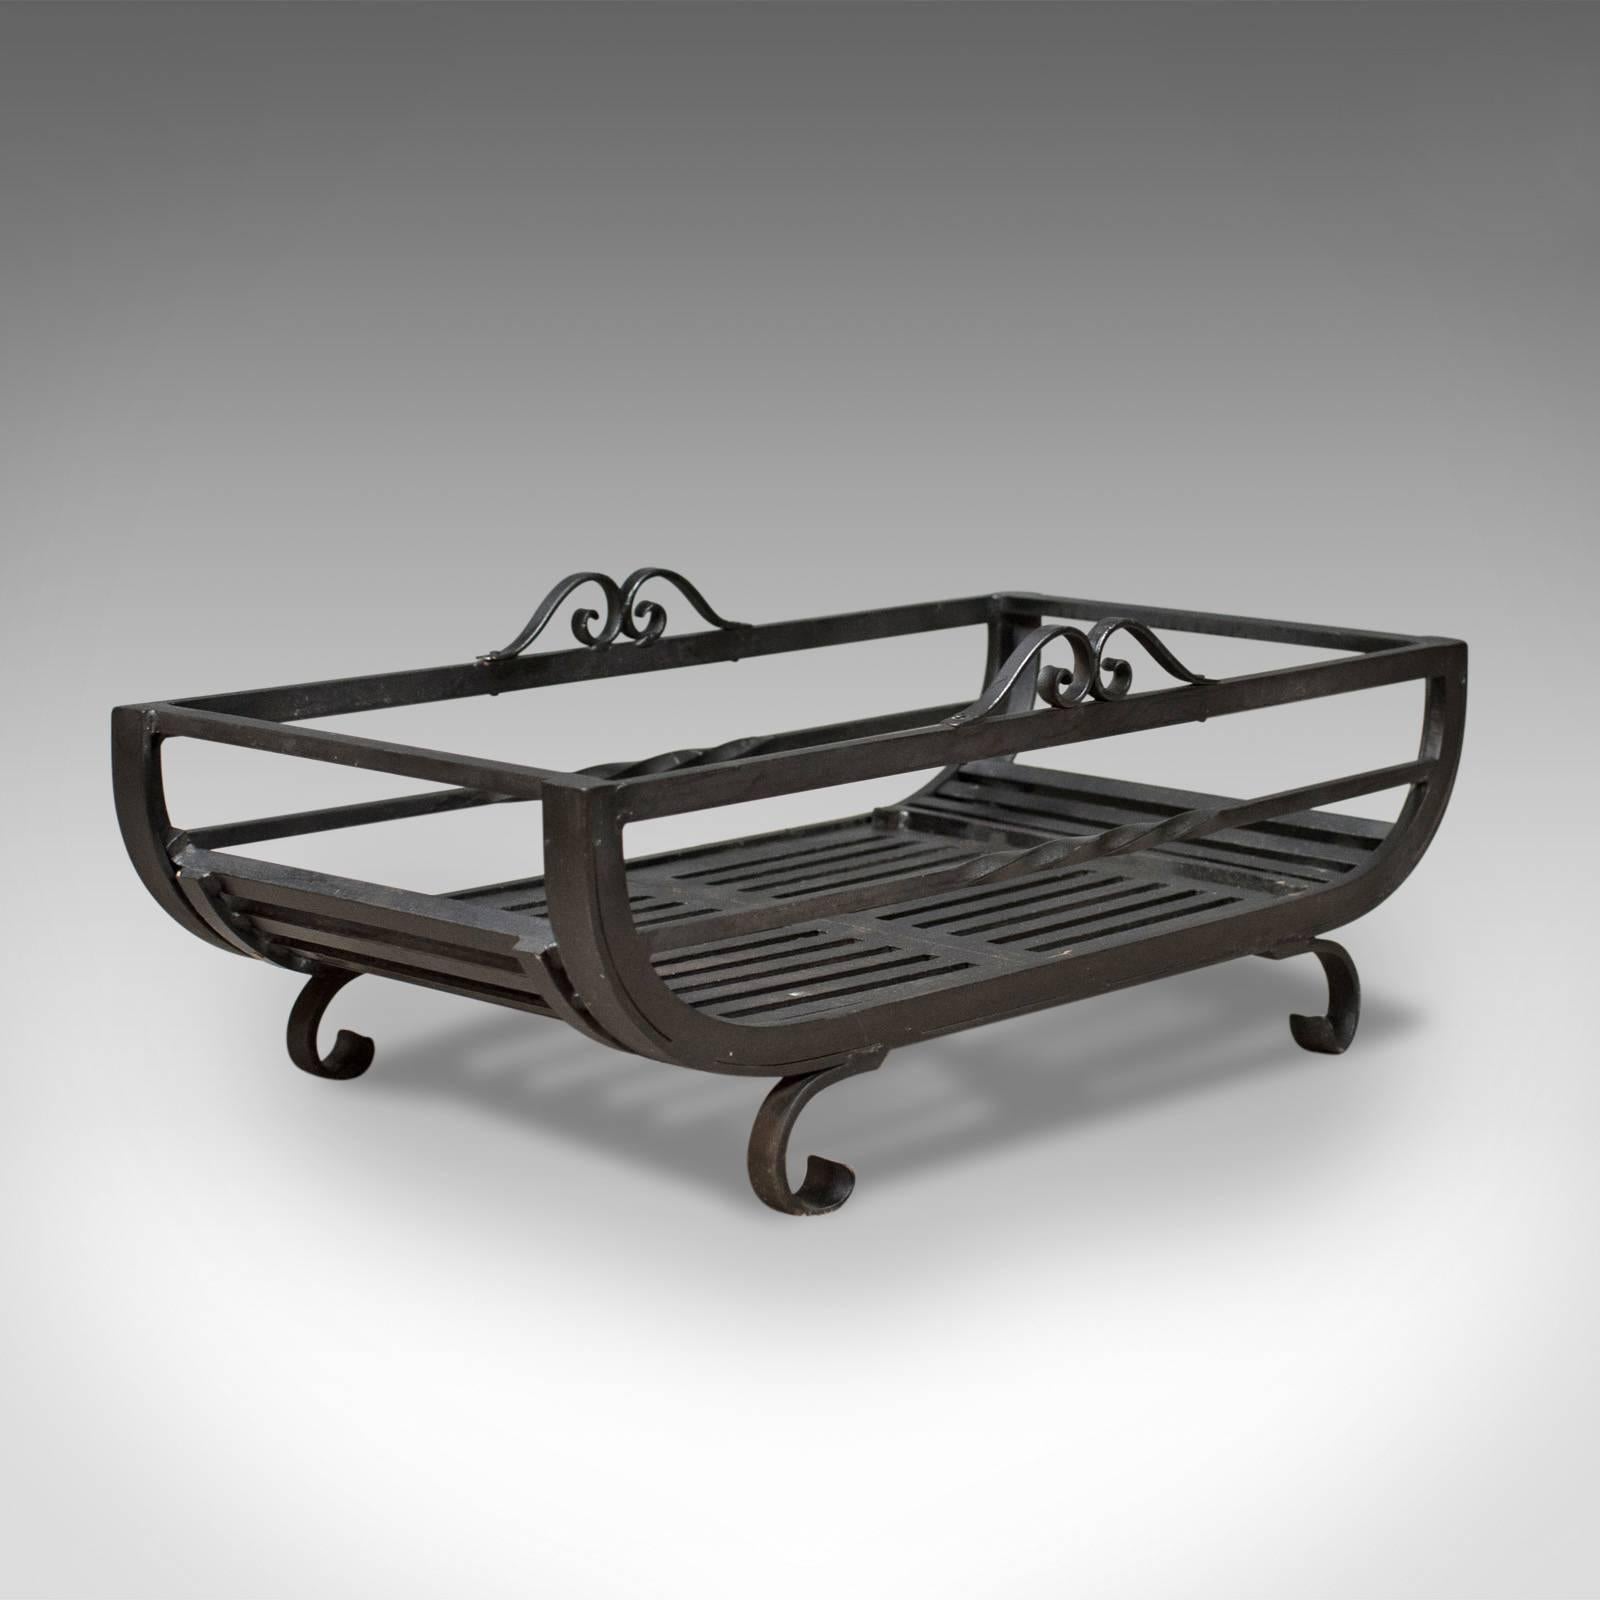 This is a large fire basket for the fireplace with an iron grate dating to the late 20th century.

A large fire grate presented in very good condition
A quality free-standing basket in attractive hand forged & cast iron
Useful low style standing